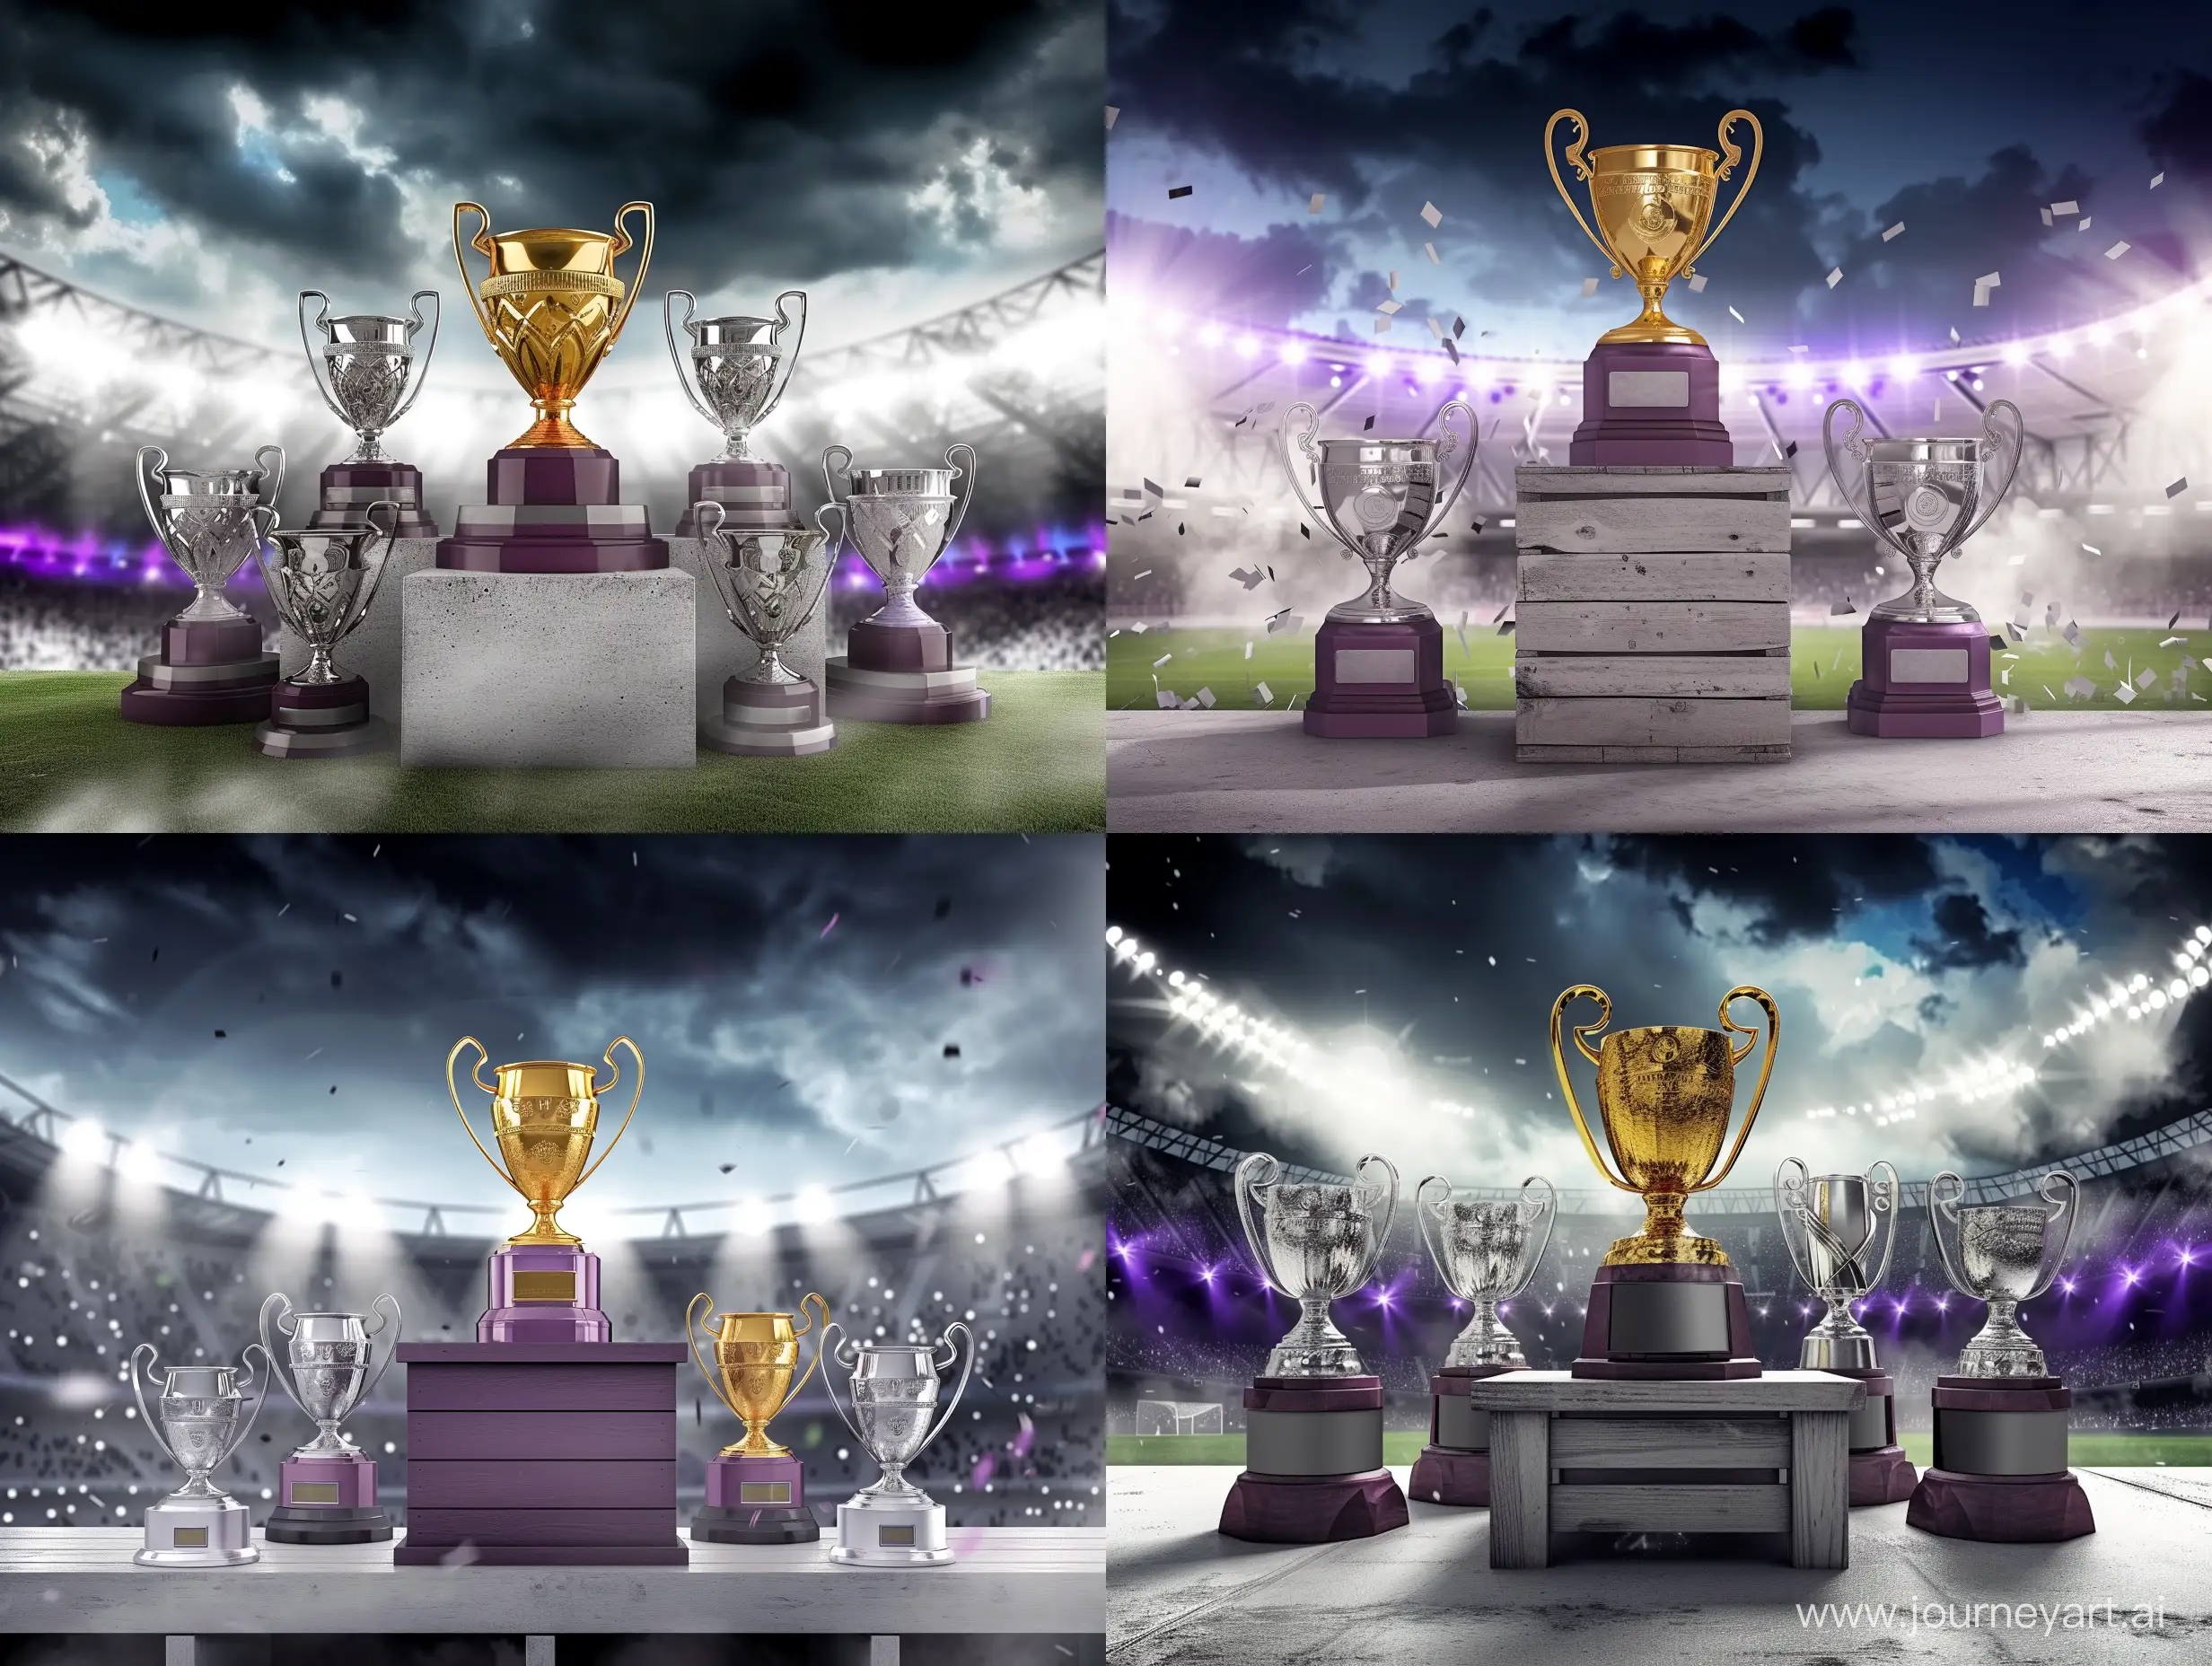 Victorious-Night-Soccer-Stadium-Podium-with-Gold-and-Silver-Trophies